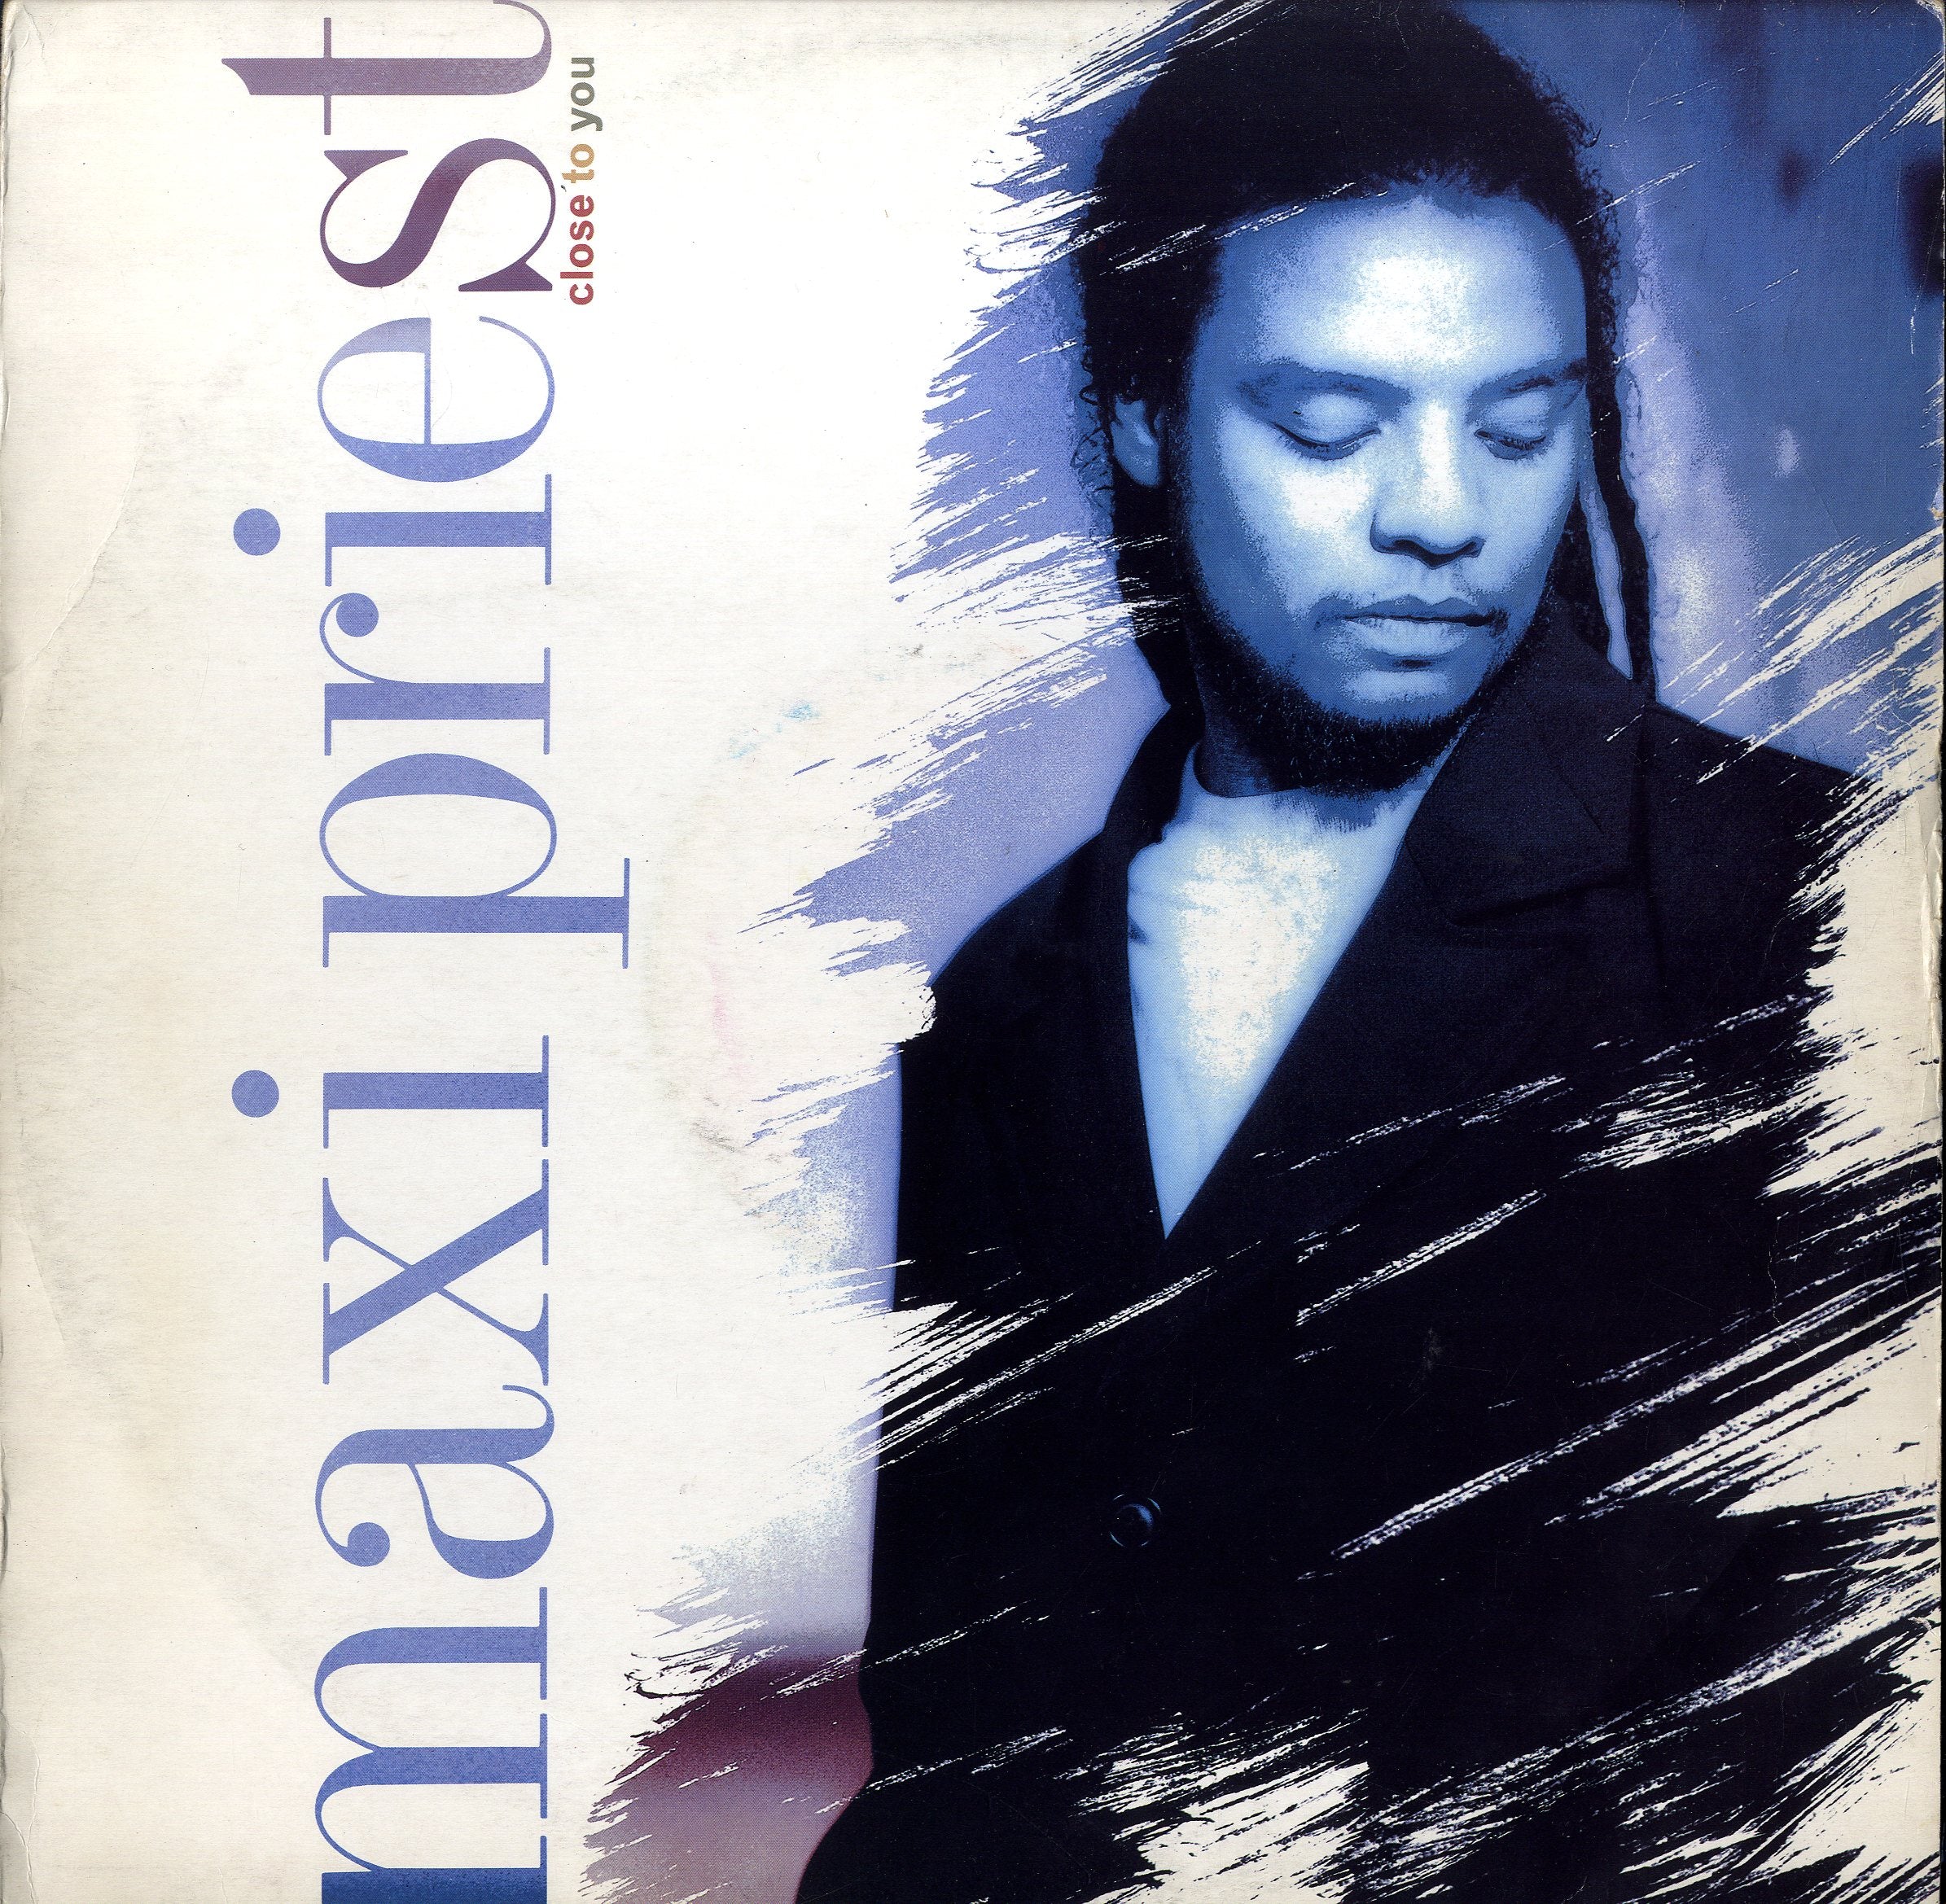 MAXI PRIEST / MAXI PRIEST & TIGER  / MAXI PRIEST [Close To You / I Know Love / Sure Fire Love]